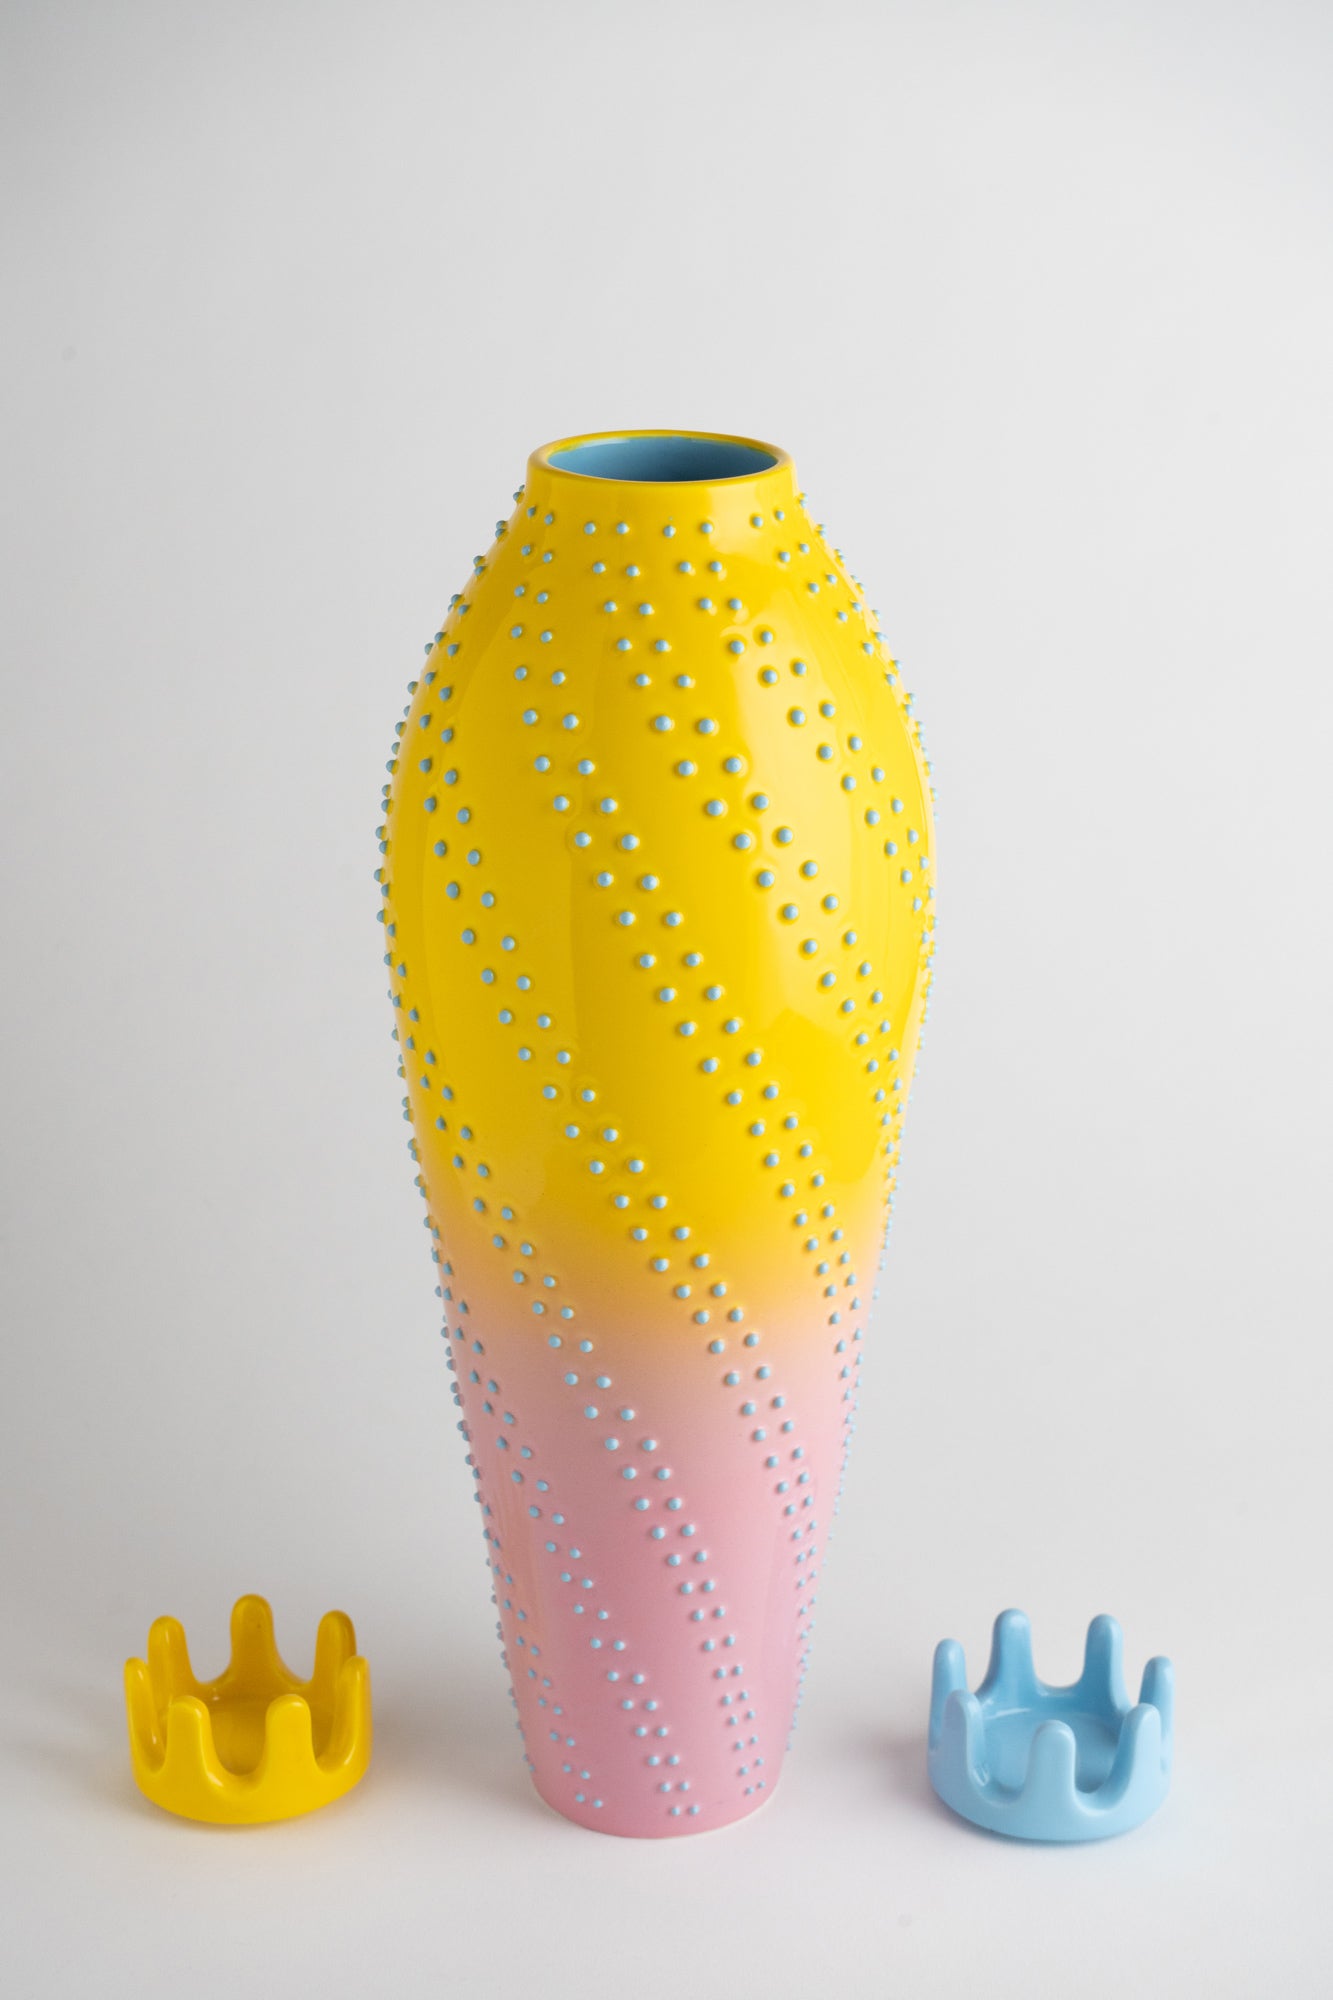 Princex vase by Adam Nathaniel Furman for Nuoveforme